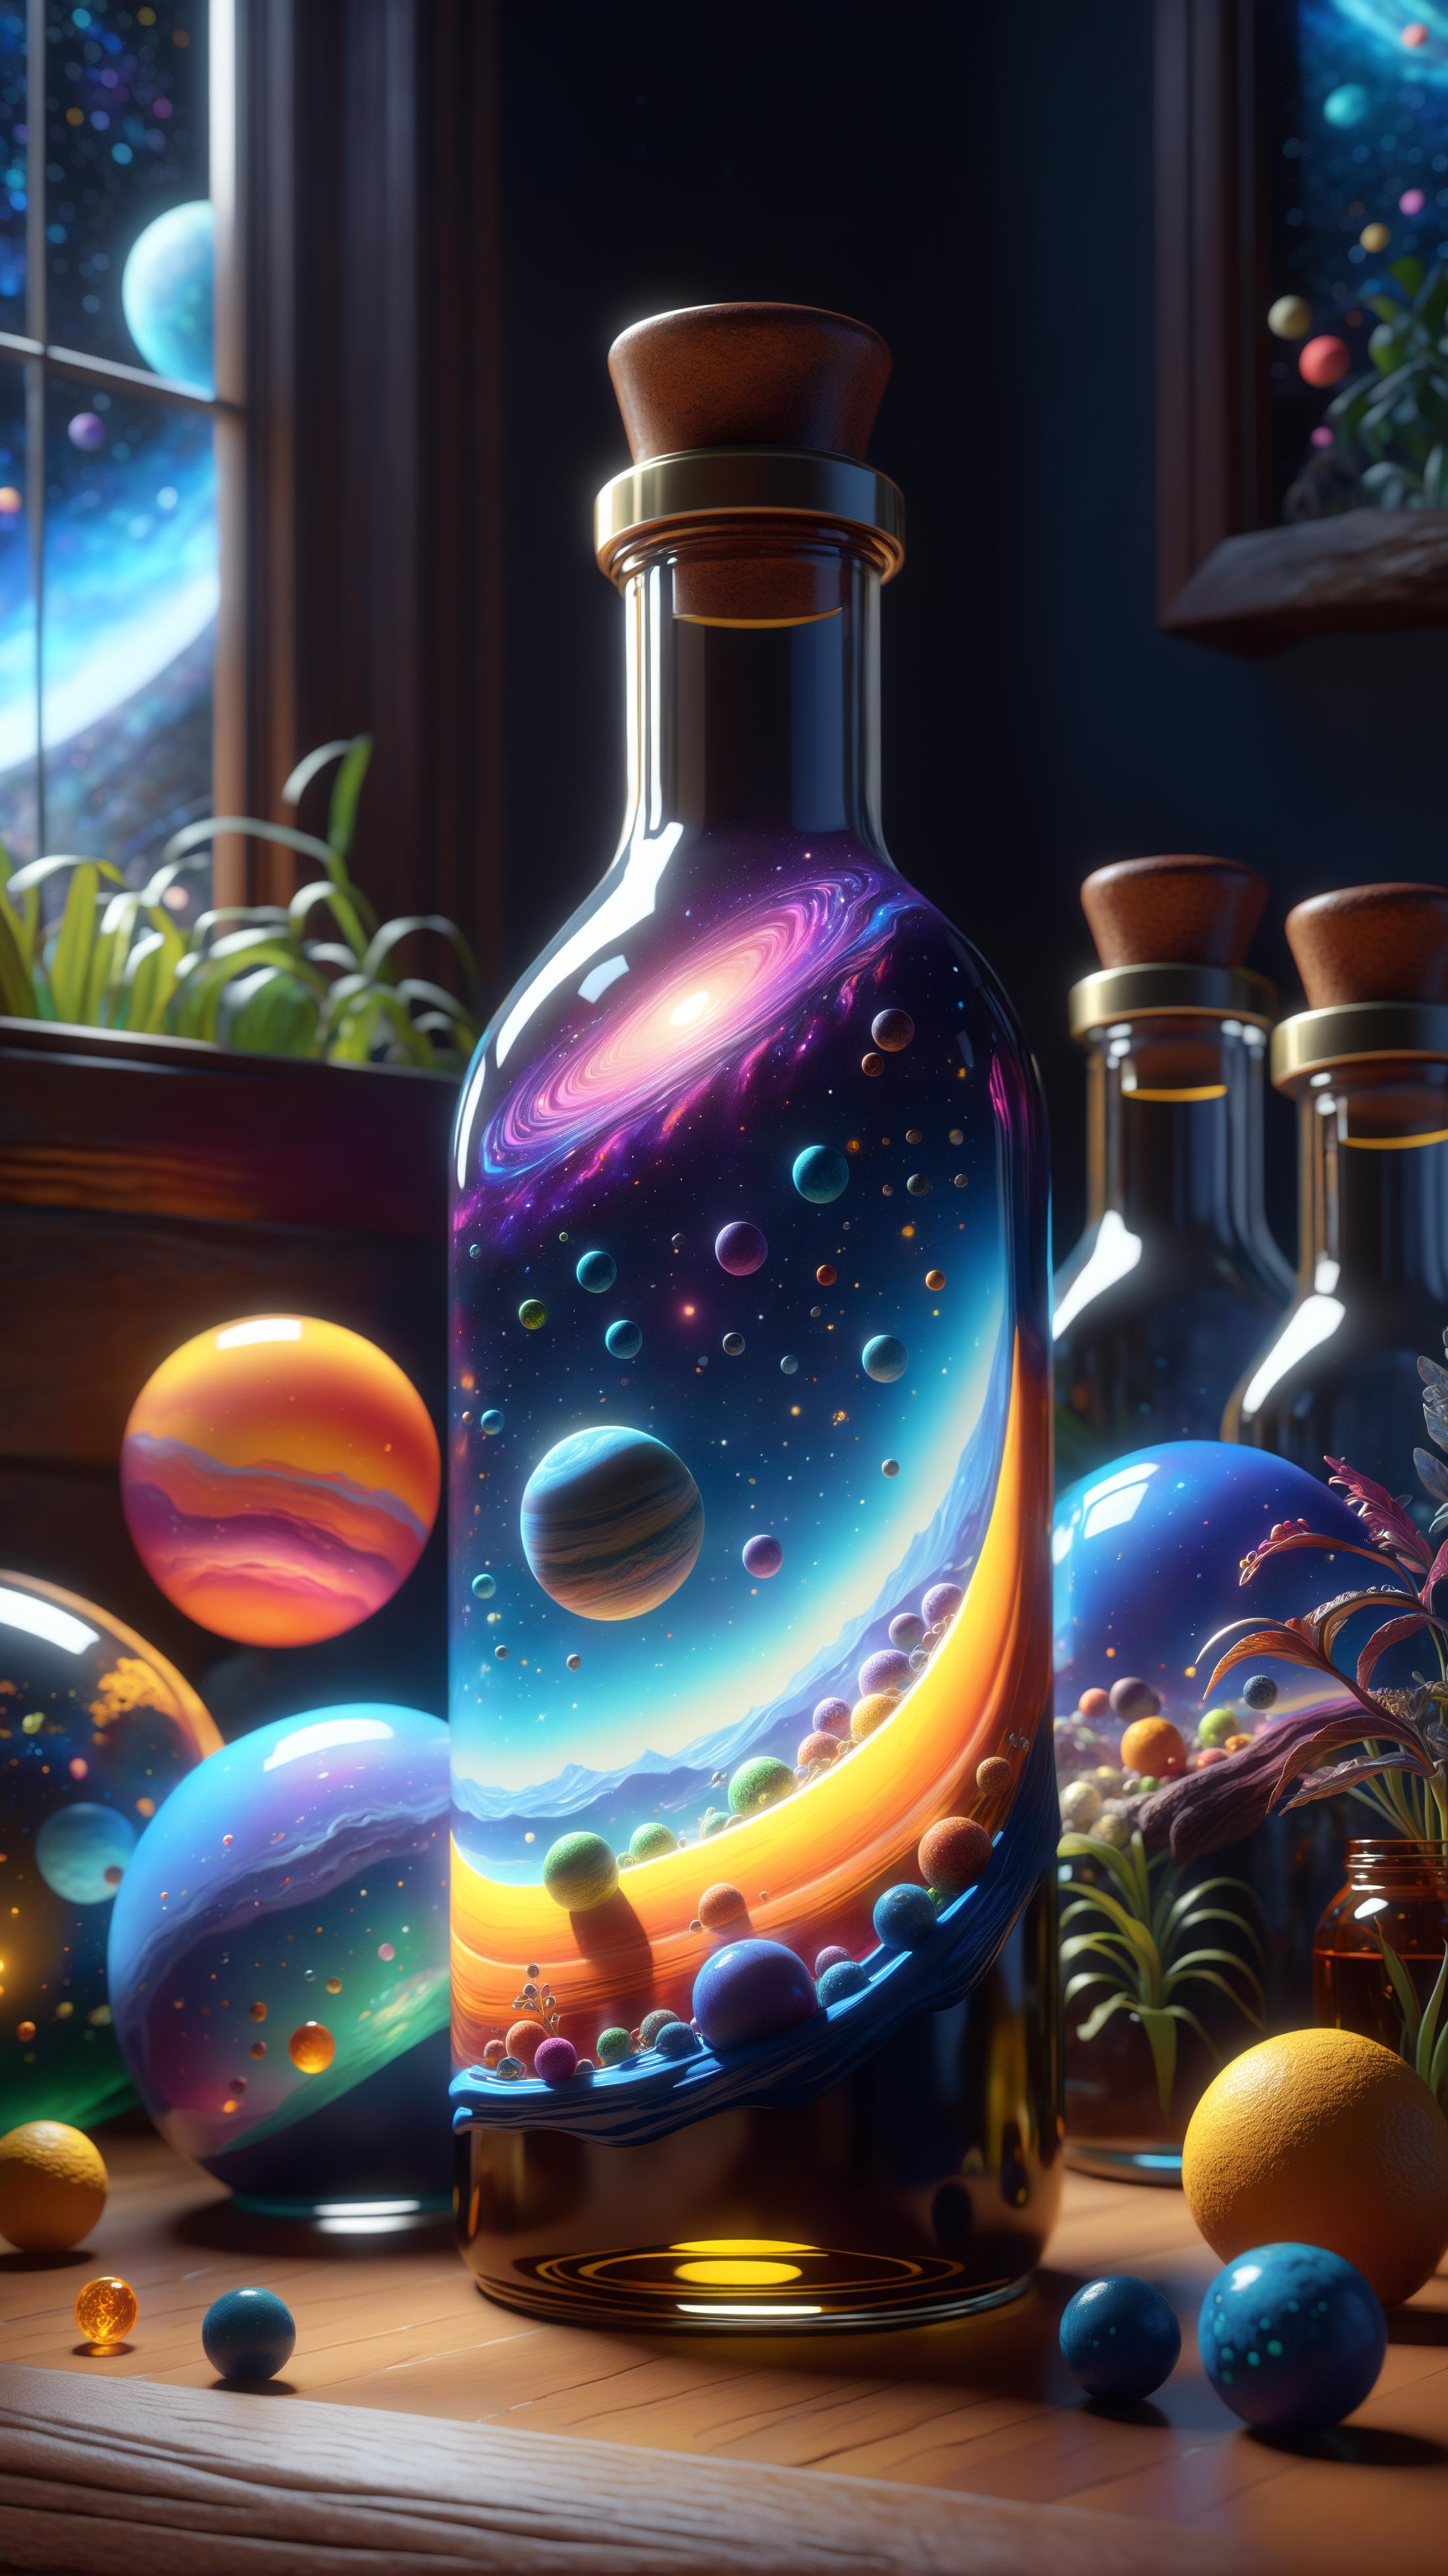 A bottle with a galaxy design on it, surrounded by other bottles and globes.